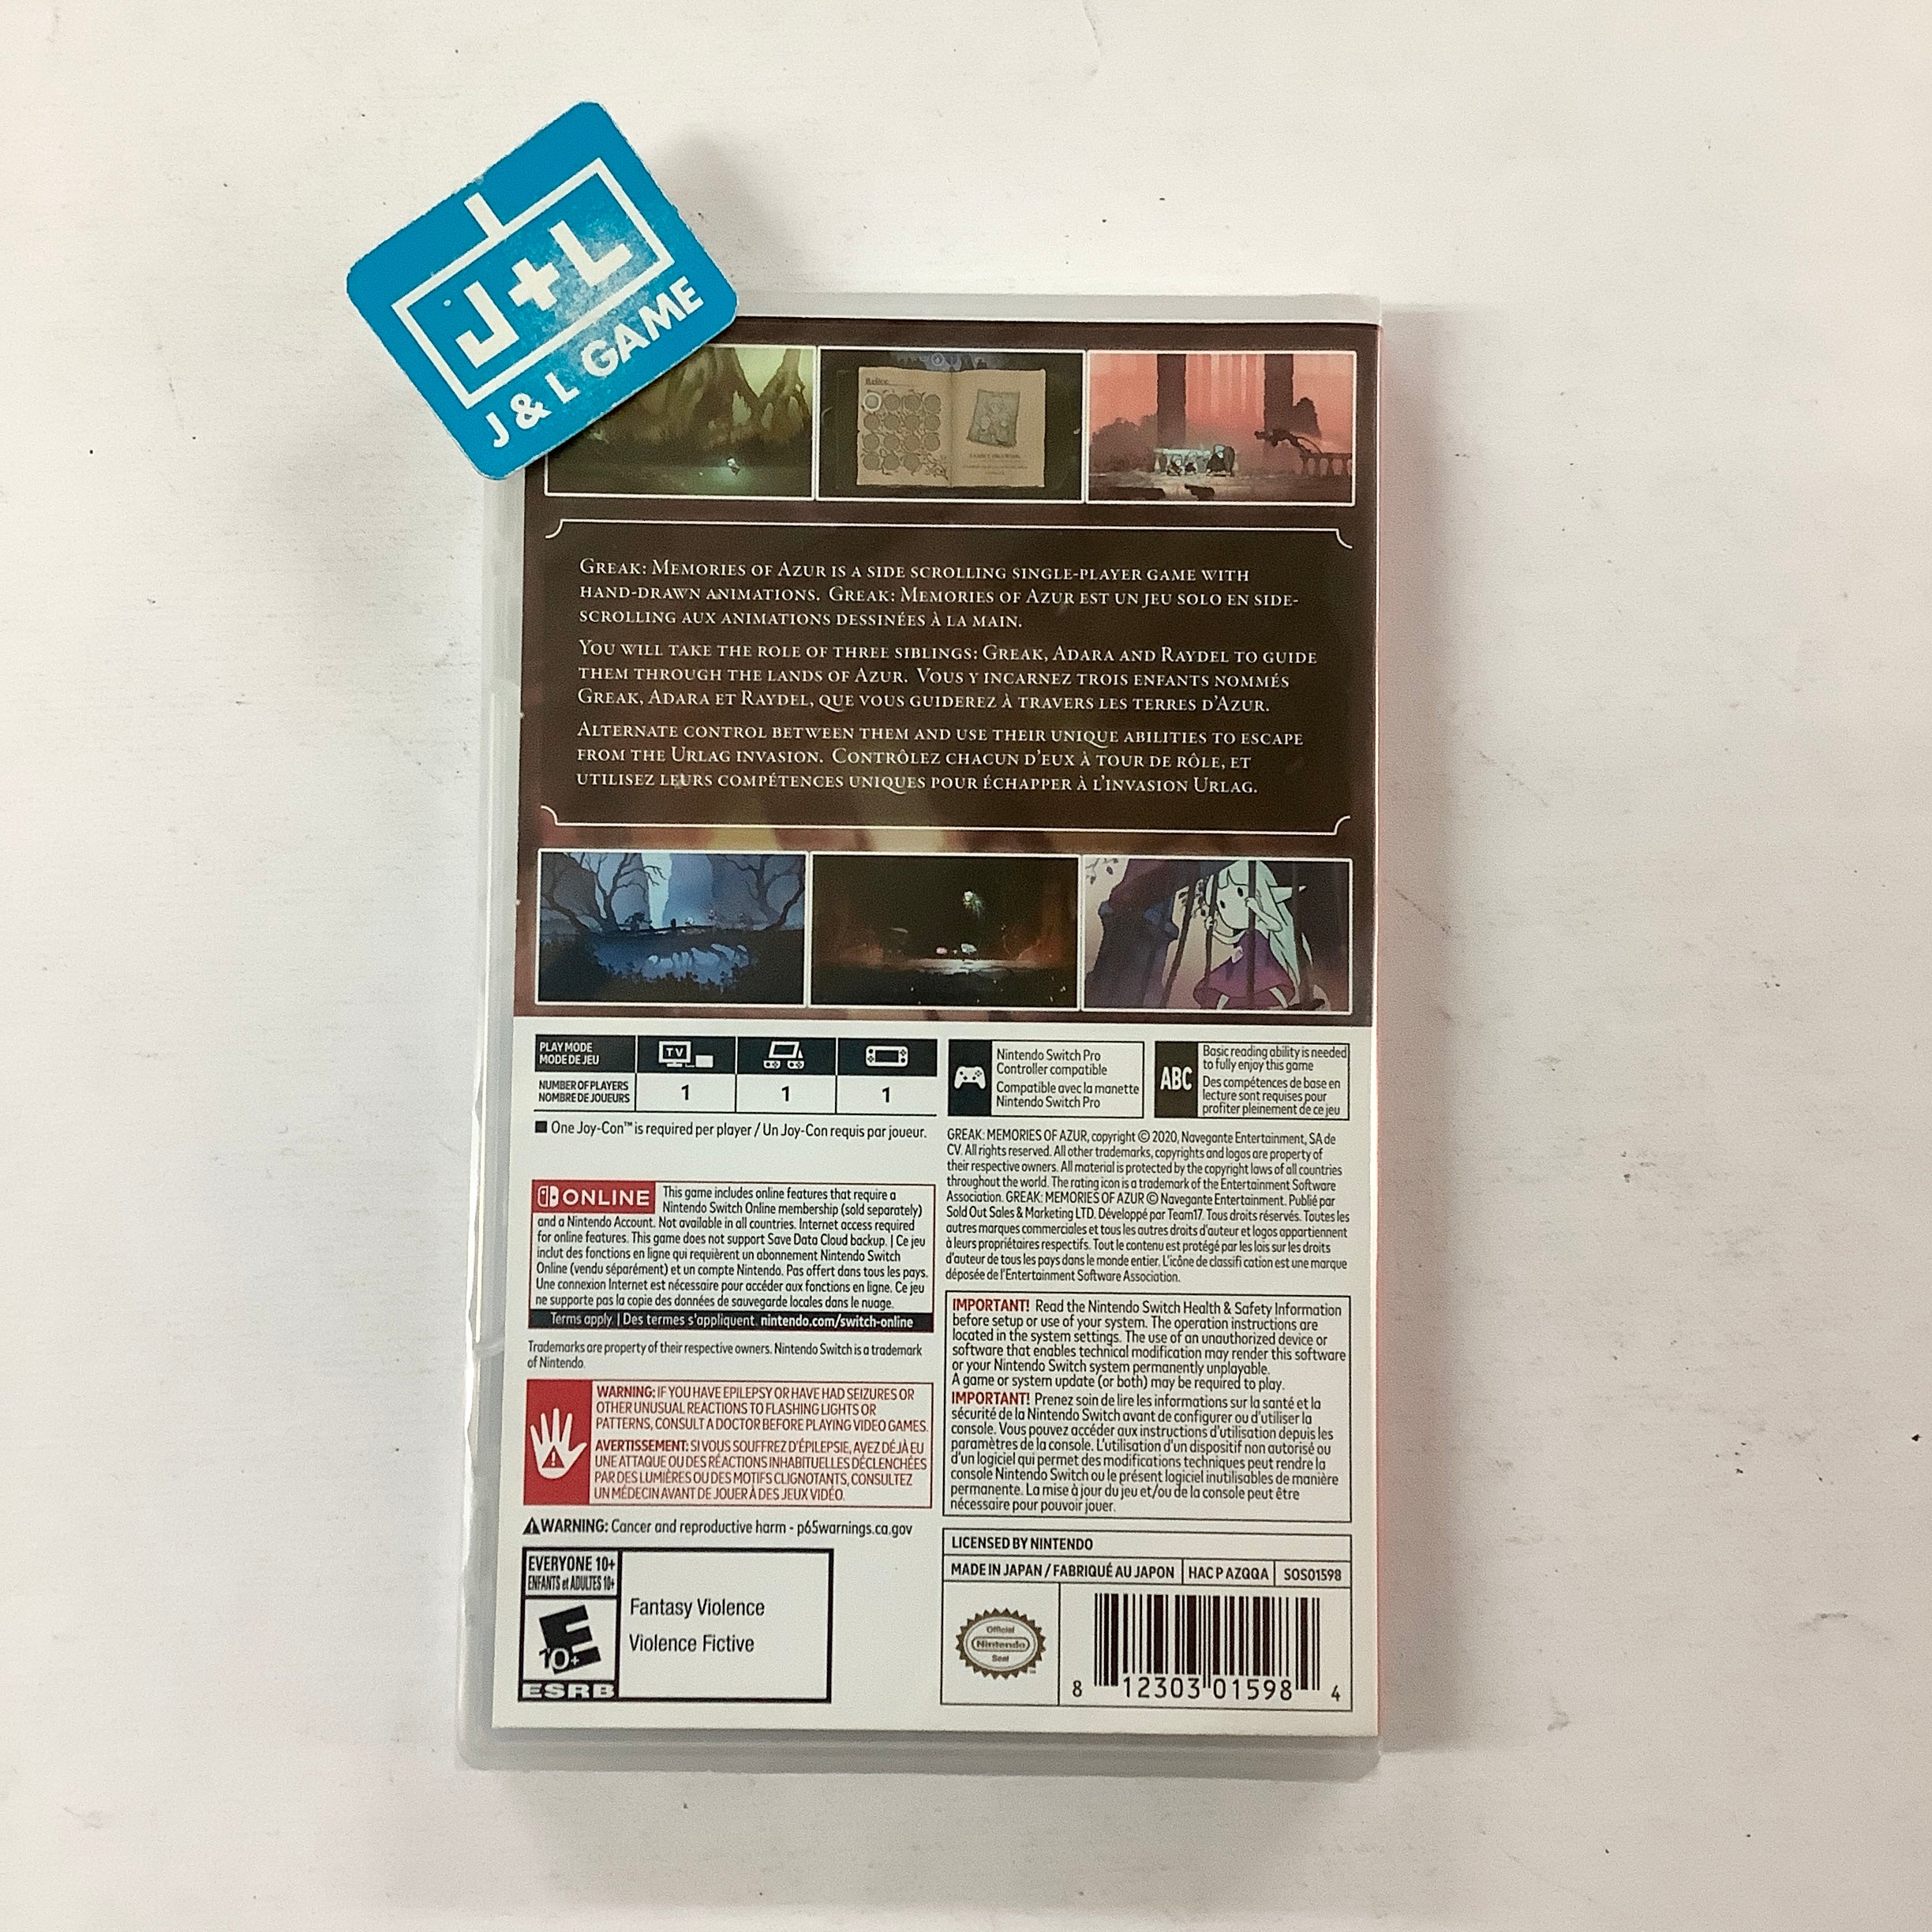 Greak: Memories of Azur - (NSW) Nintendo Switch Video Games Sold Out   